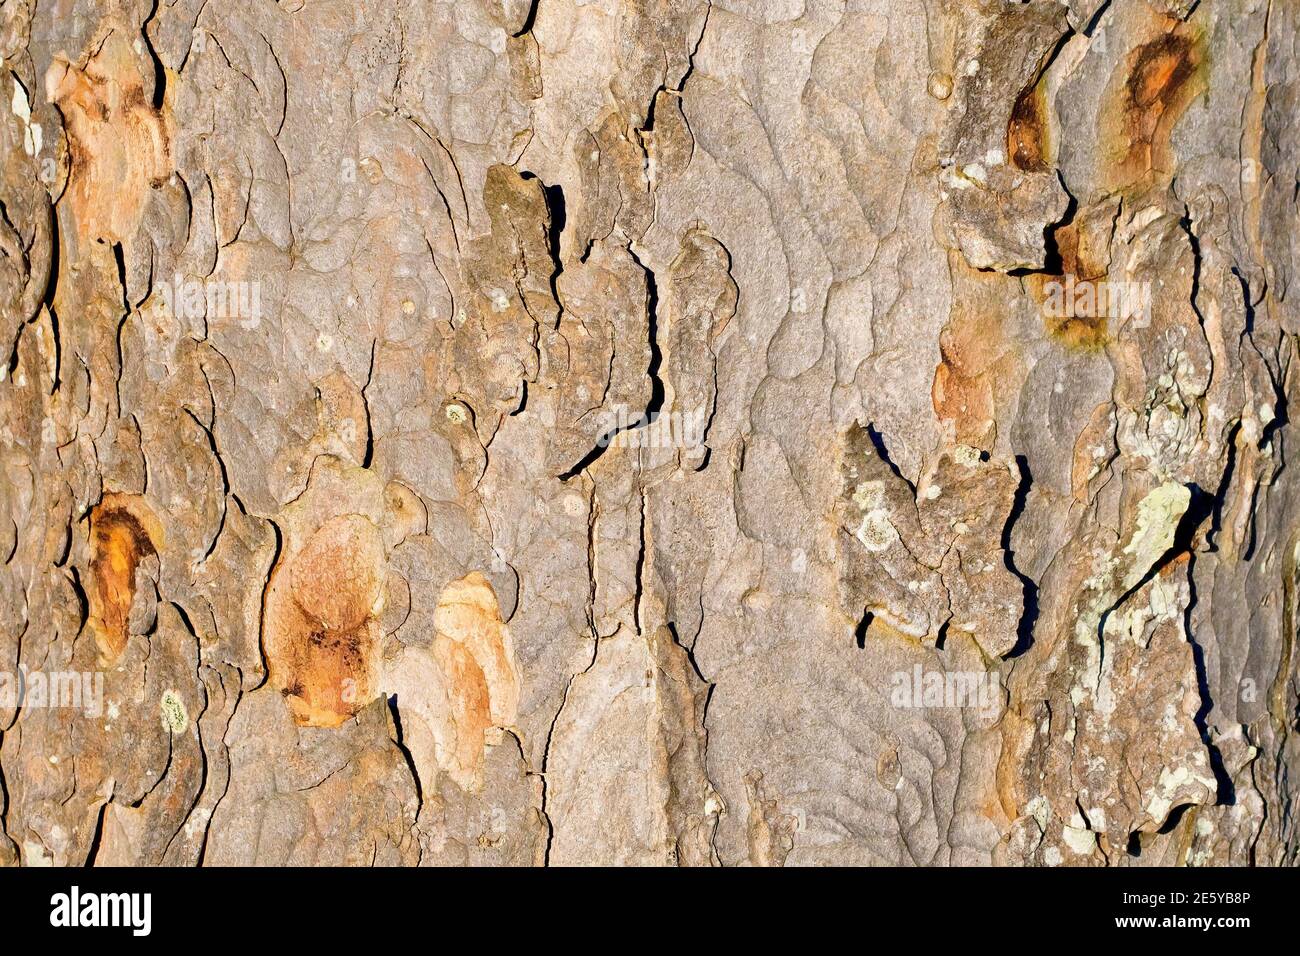 Sycamore (acer pseudoplatanus), close up showing the texture of the broken and flaking bark of the tree. Stock Photo